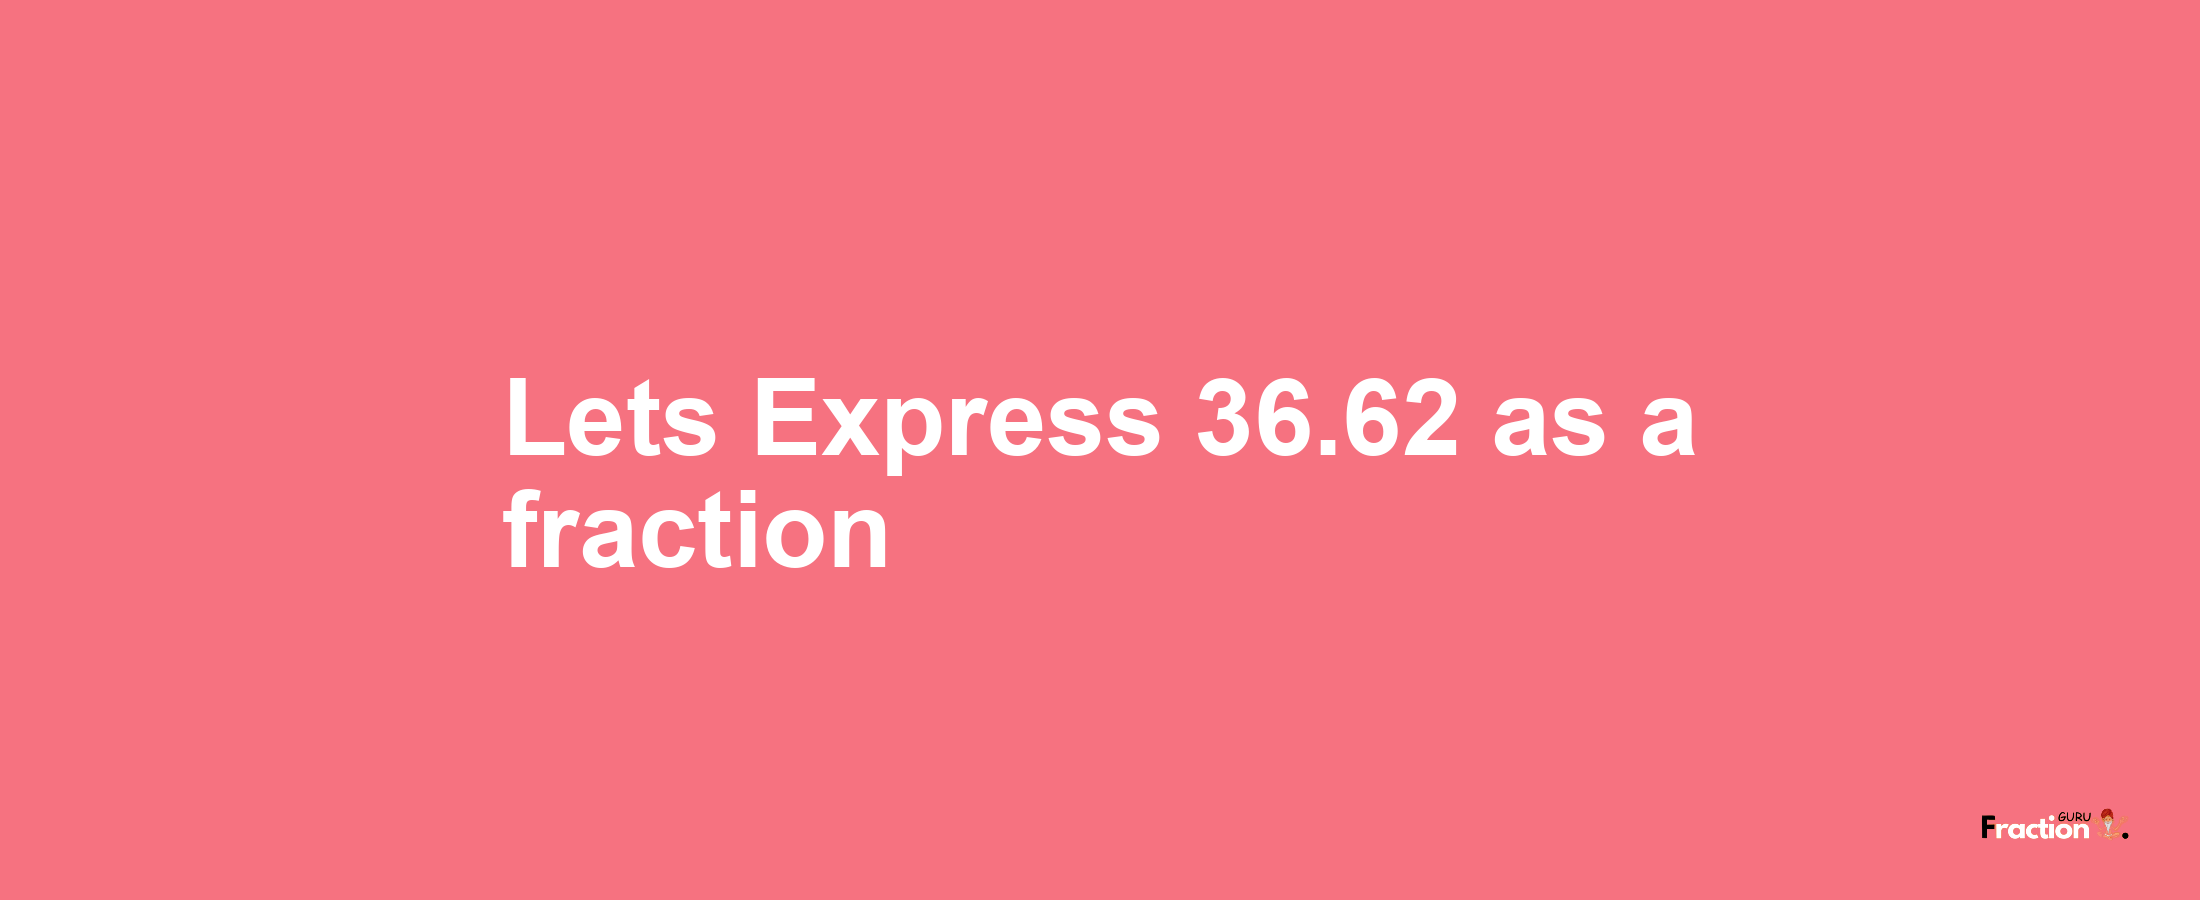 Lets Express 36.62 as afraction